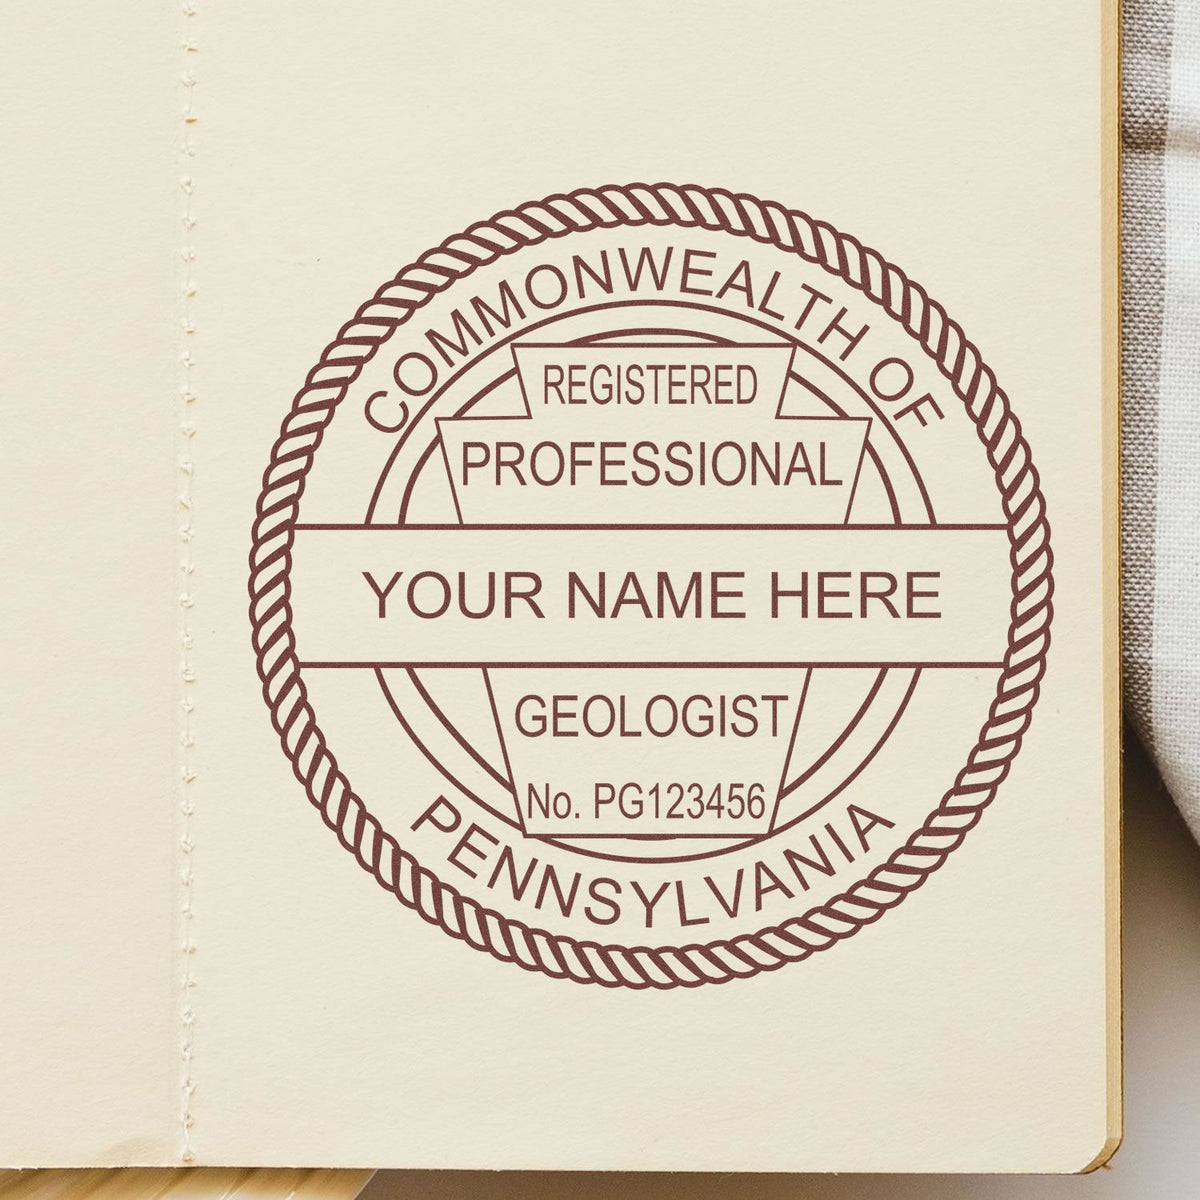 The Self-Inking Pennsylvania Geologist Stamp stamp impression comes to life with a crisp, detailed image stamped on paper - showcasing true professional quality.